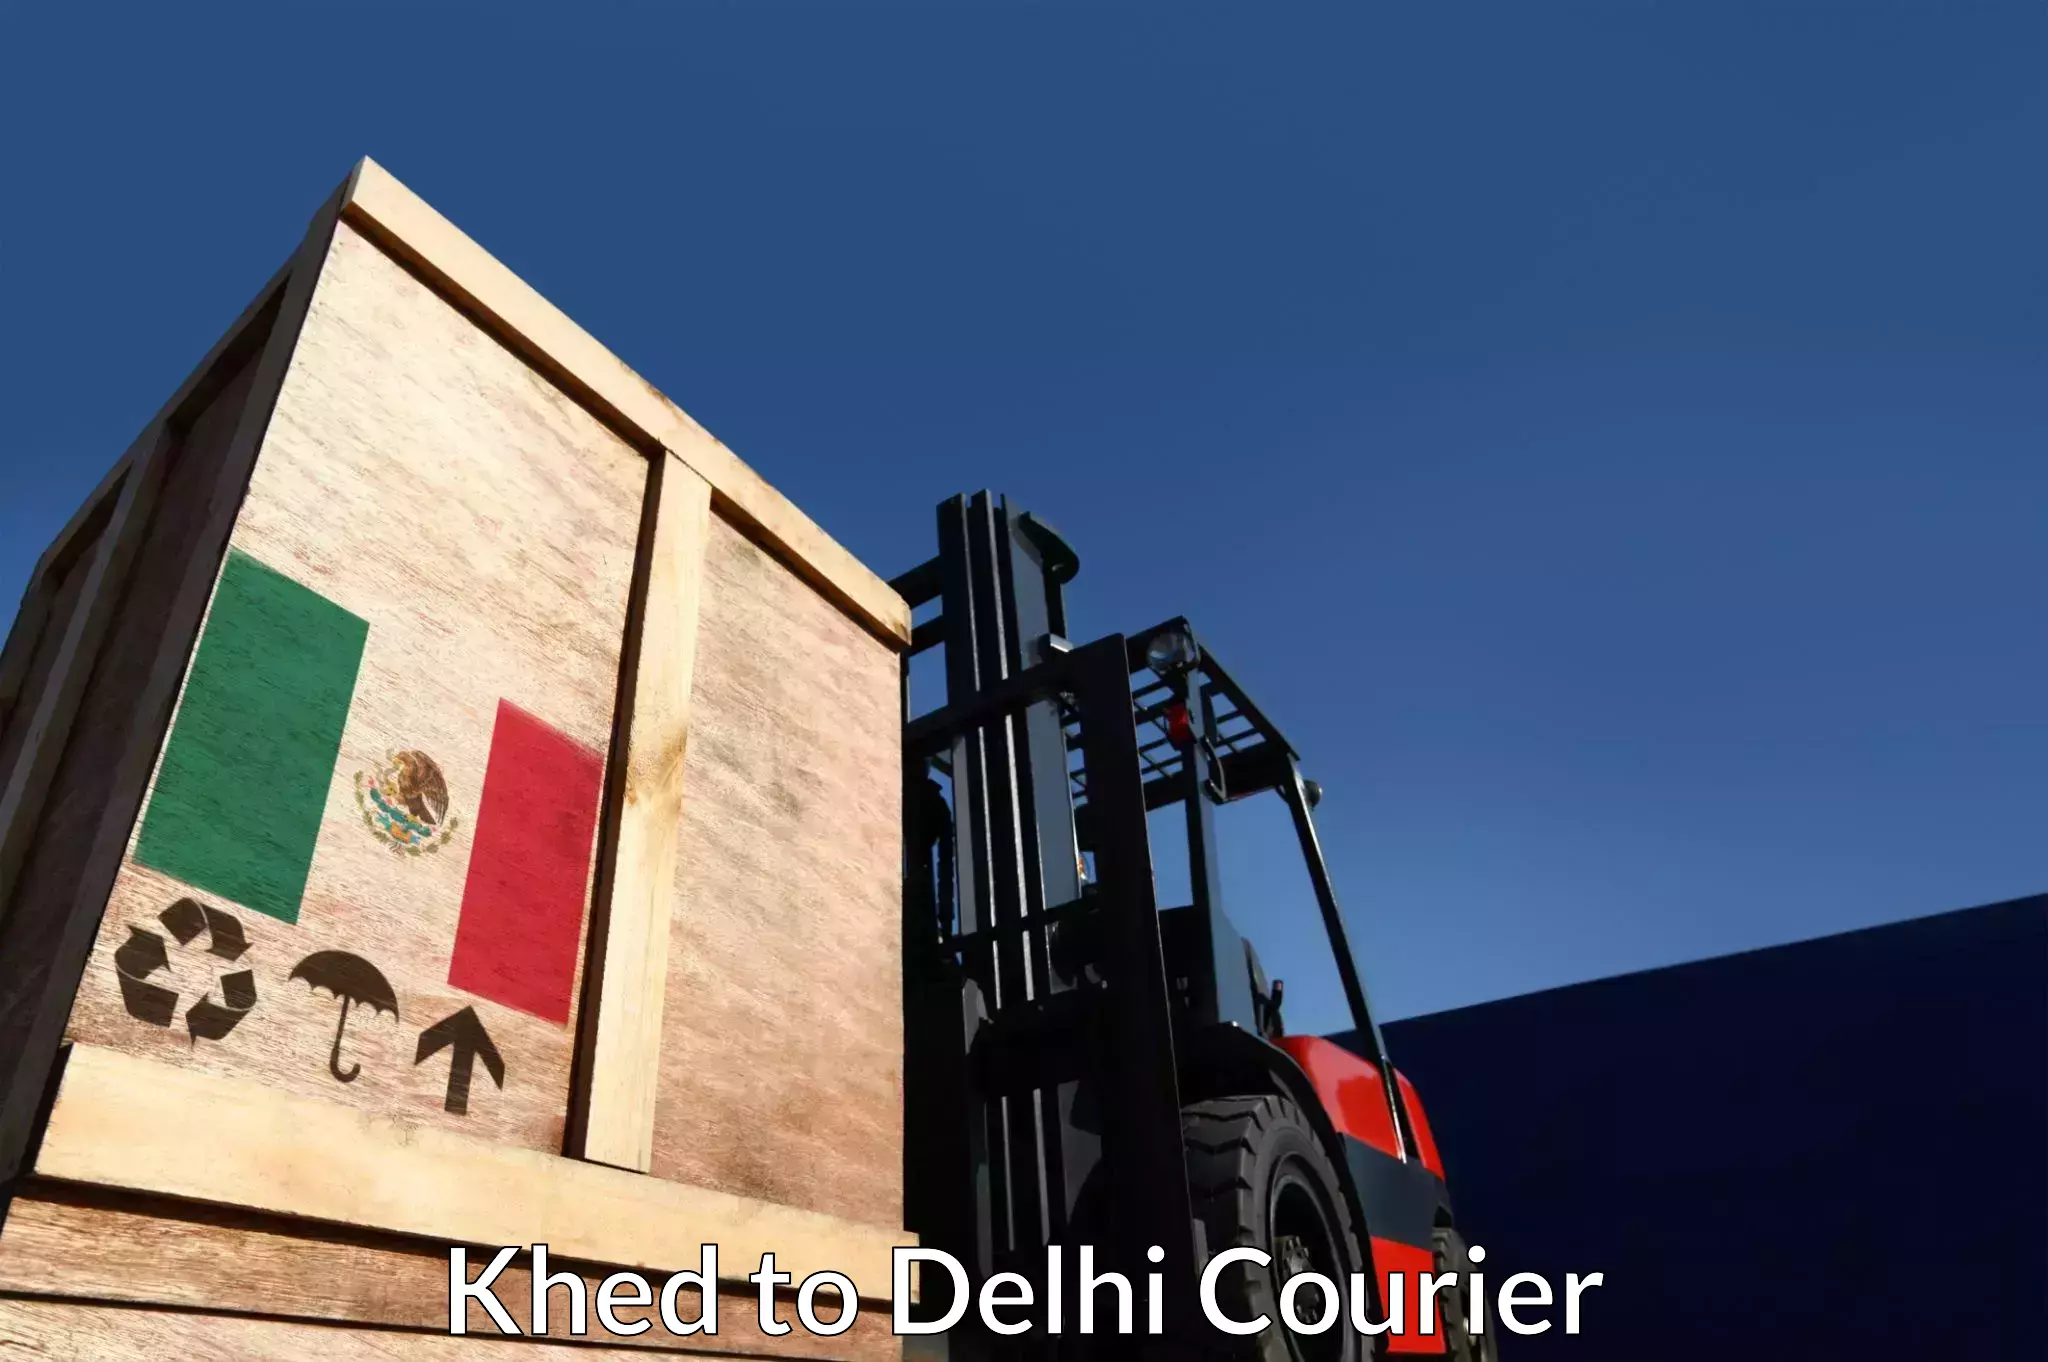 User-friendly delivery service Khed to University of Delhi